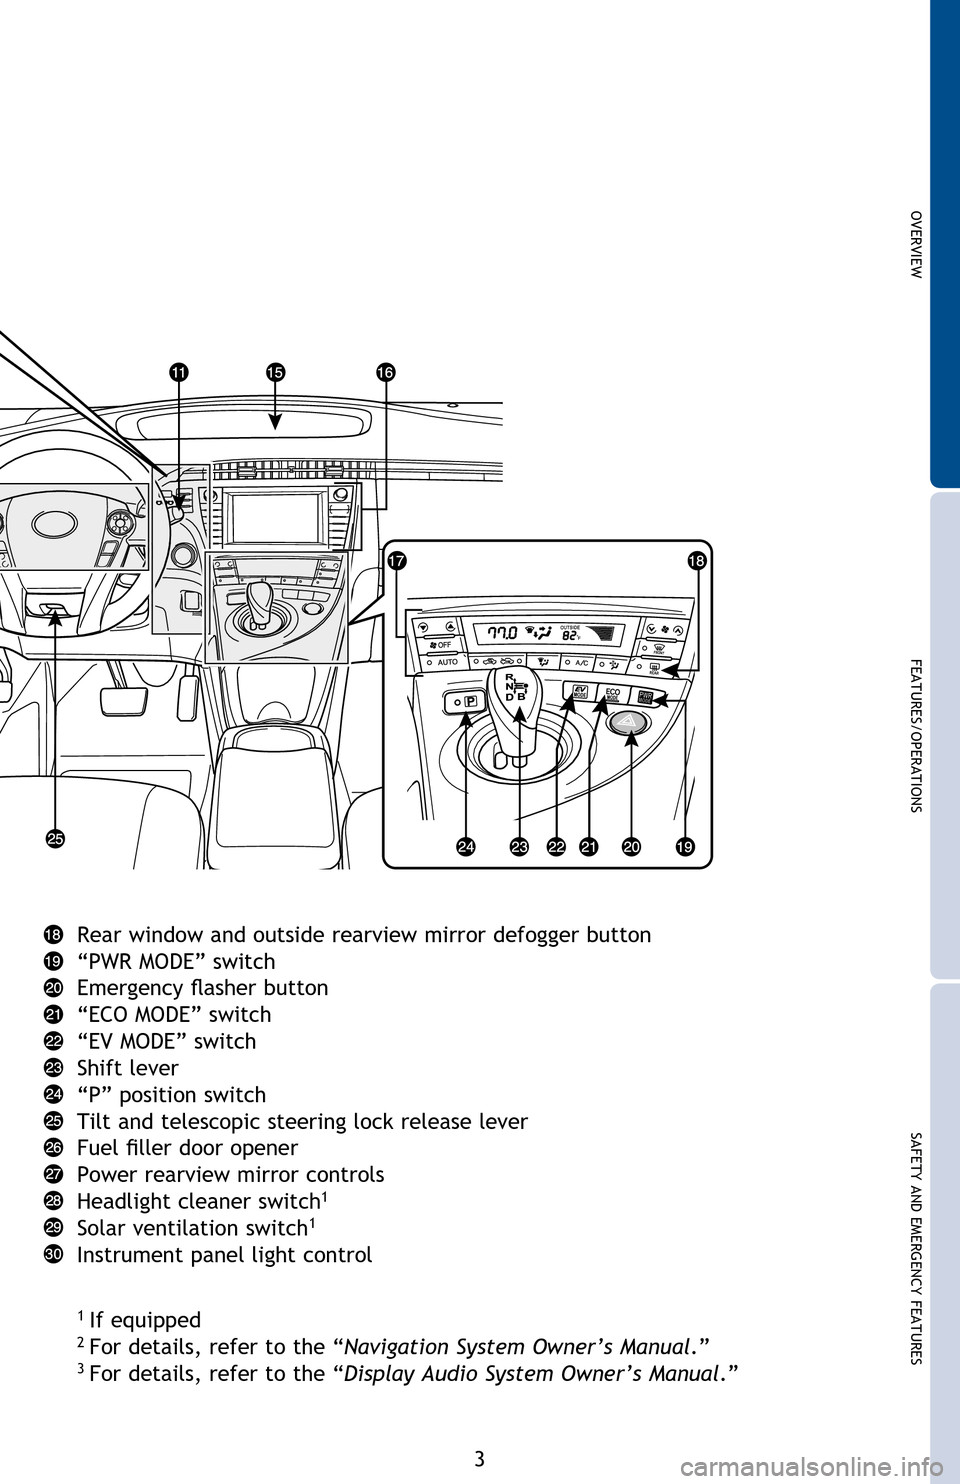 TOYOTA PRIUS 2013 3.G Quick Reference Guide OVERVIEW
FEATURES/OPERATIONS
SAFETY AND EMERGENCY FEATURES
3
Rear window and outside rearview mirror defogger button
“PWR MODE” switch
Emergency flasher button
“ECO MODE” switch
“EV MODE” 